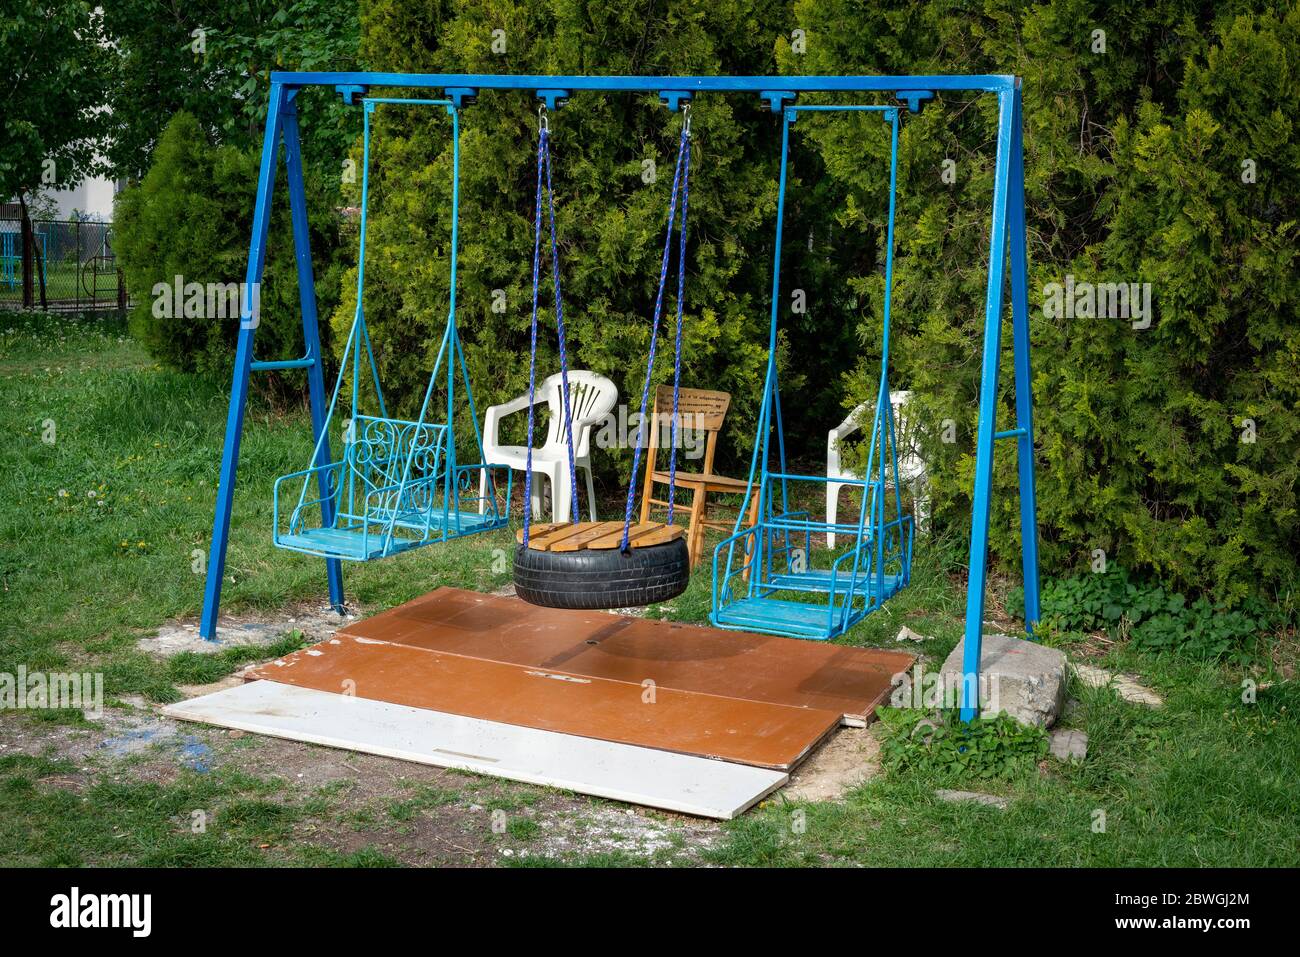 Empty metal swings and chairs at playground and picnic area in urban environment, Sofia, Bulgaria, Eastern Europe, EU Stock Photo